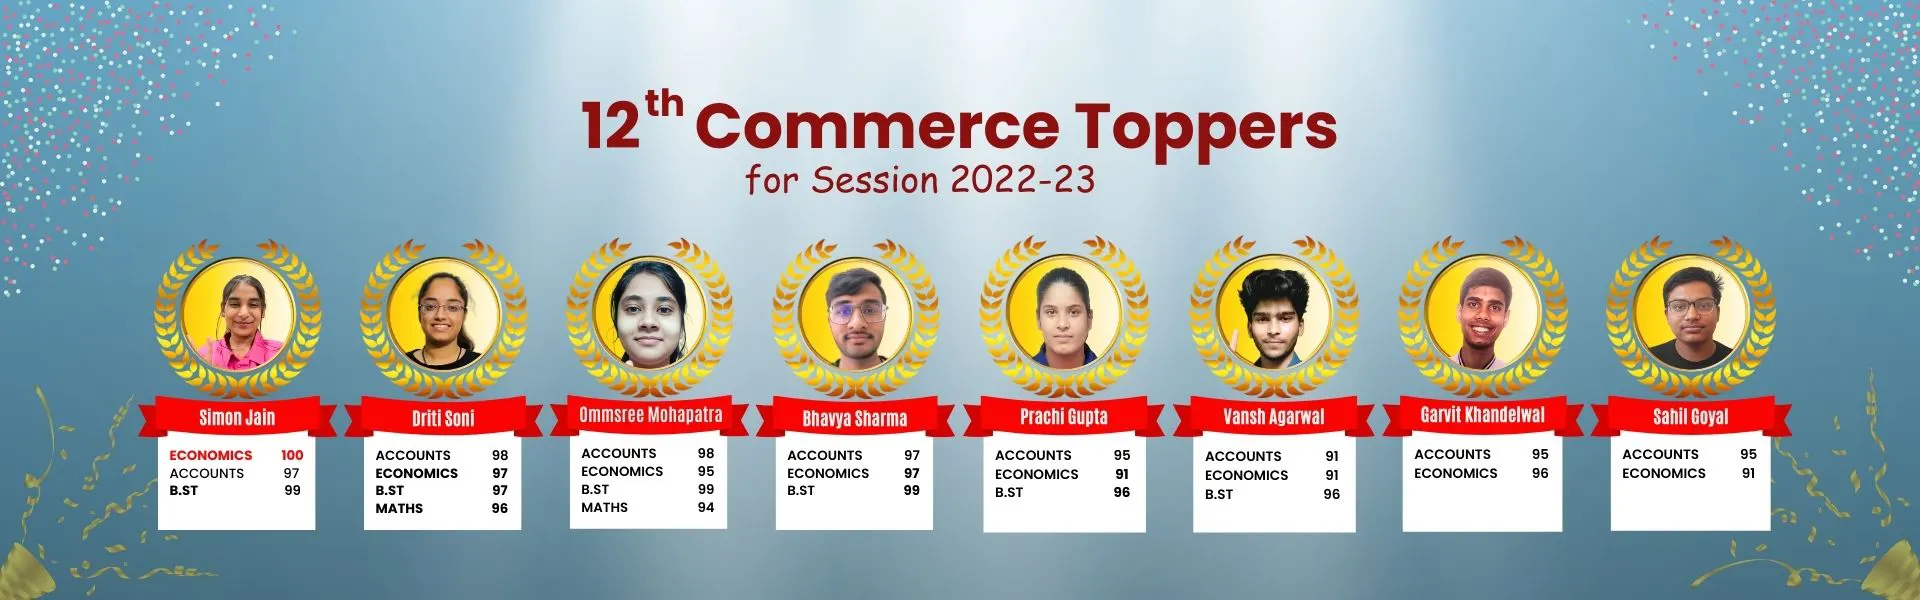 VSI 12th Commerce Toppers